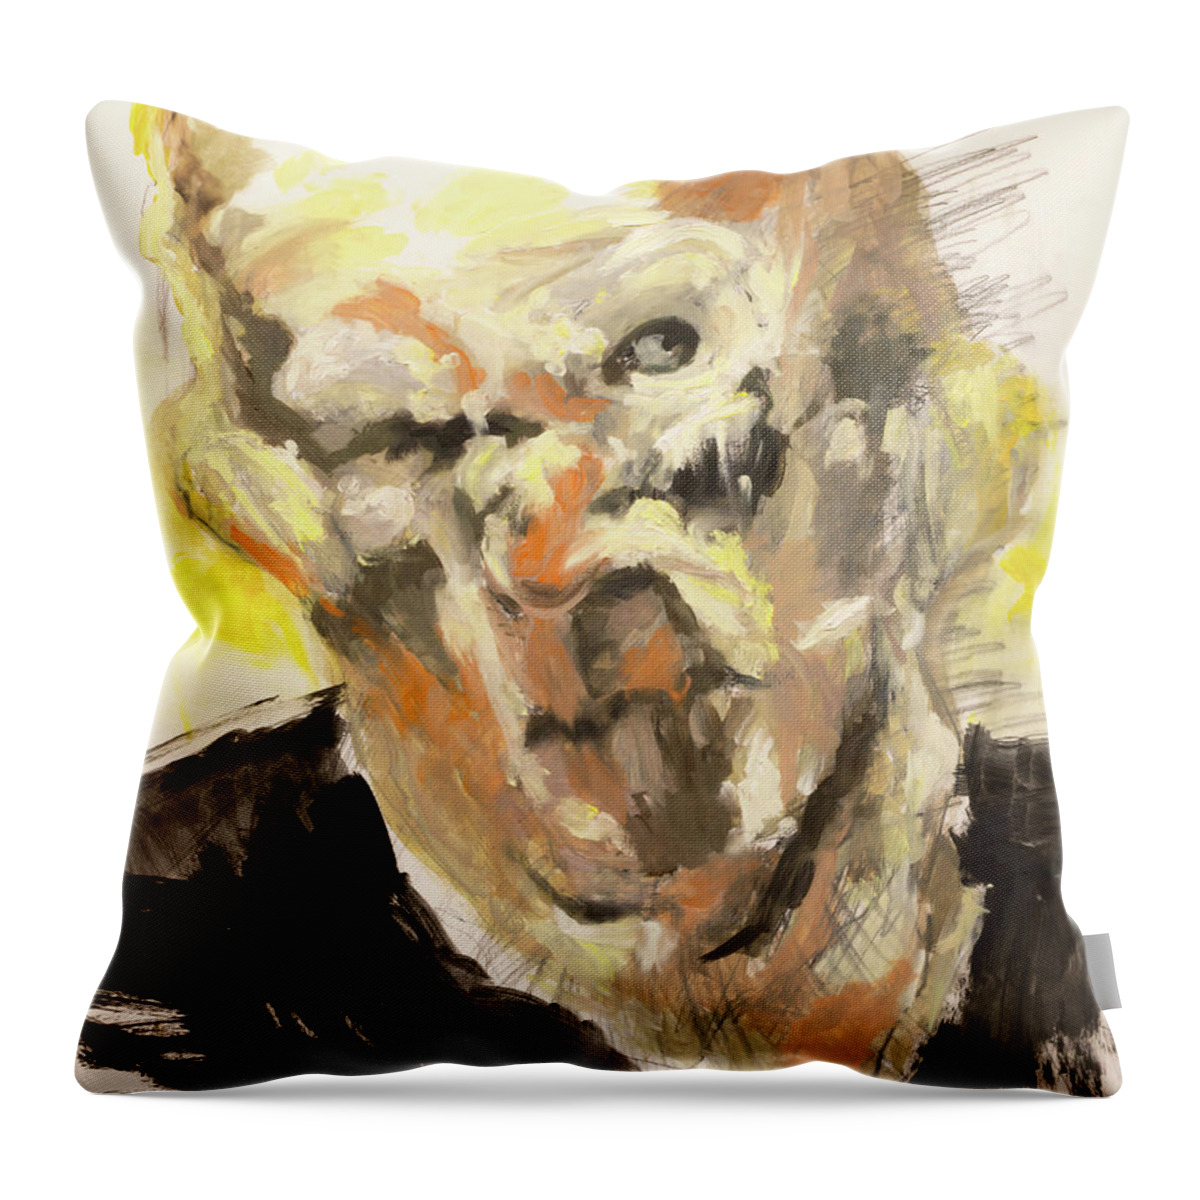 #artandtruecrime Throw Pillow featuring the painting Study of an Unknown Inmate 8 by Veronica Huacuja